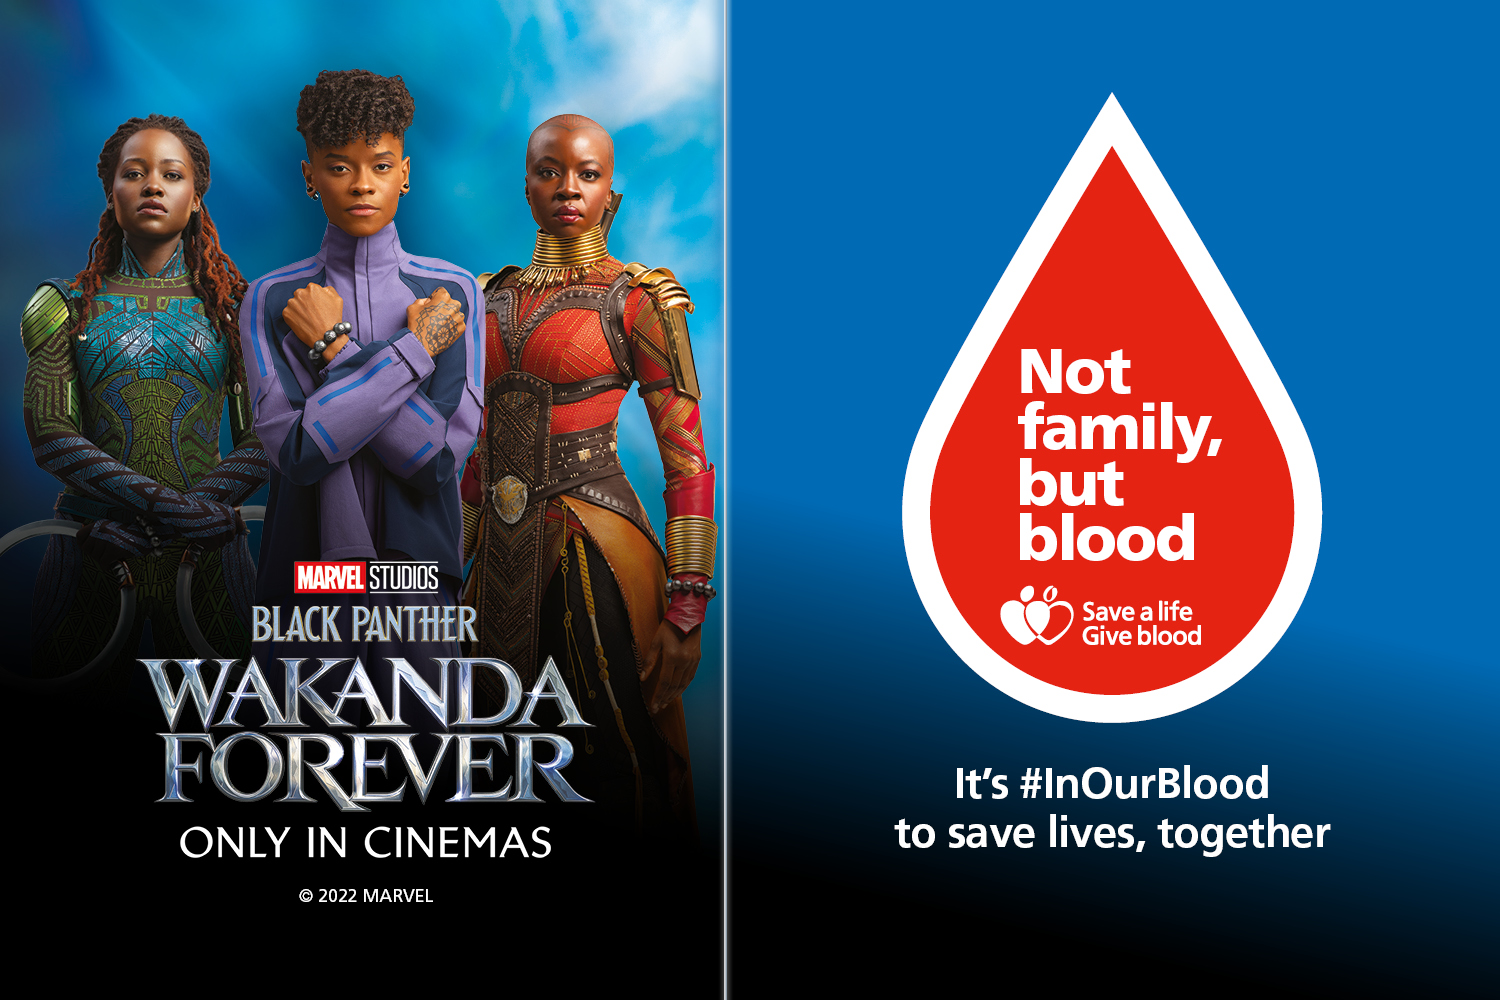 Marvel Studios’ Black Panther: Wakanda Forever and NHS join forces in a bid to boost Black heritage blood donors